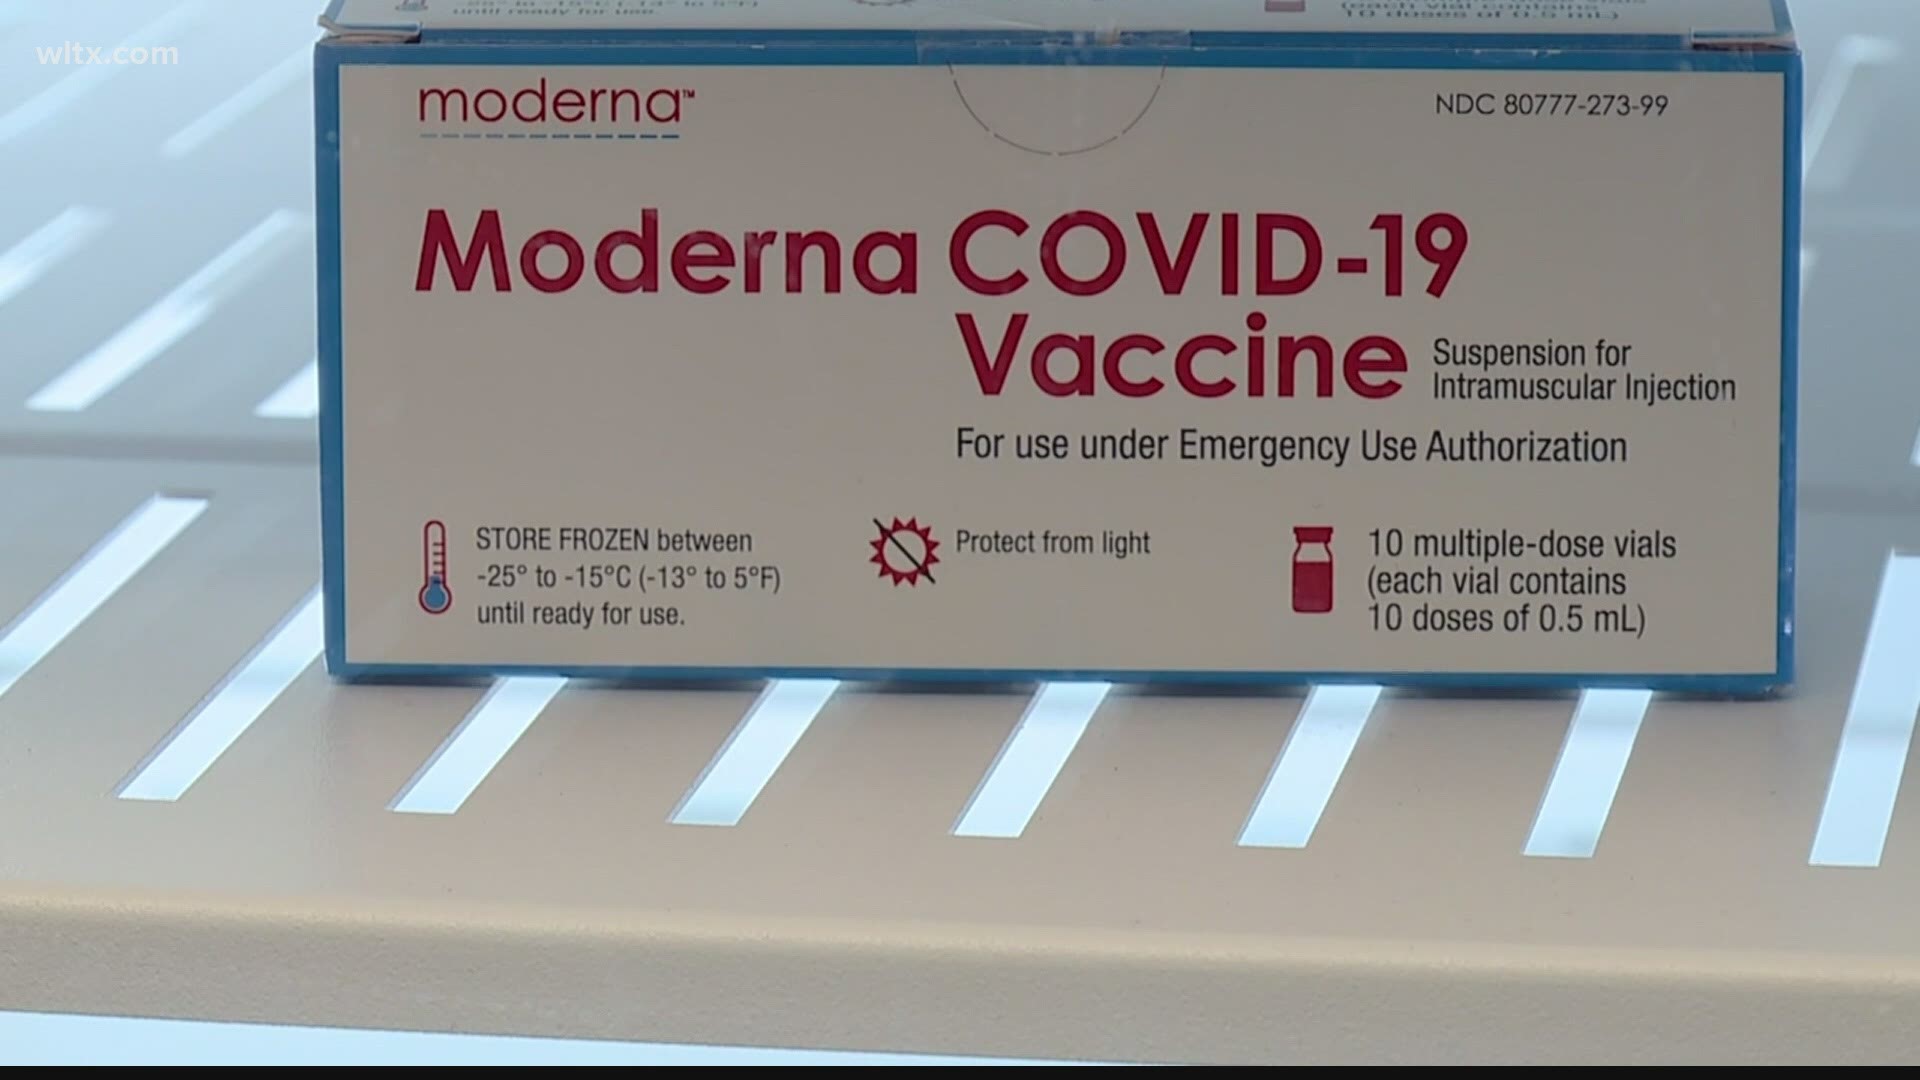 Dr. Burch said the Moderna COVID-19 vaccine trial will focus on kids as young as 6-months-old to 11-years-old.